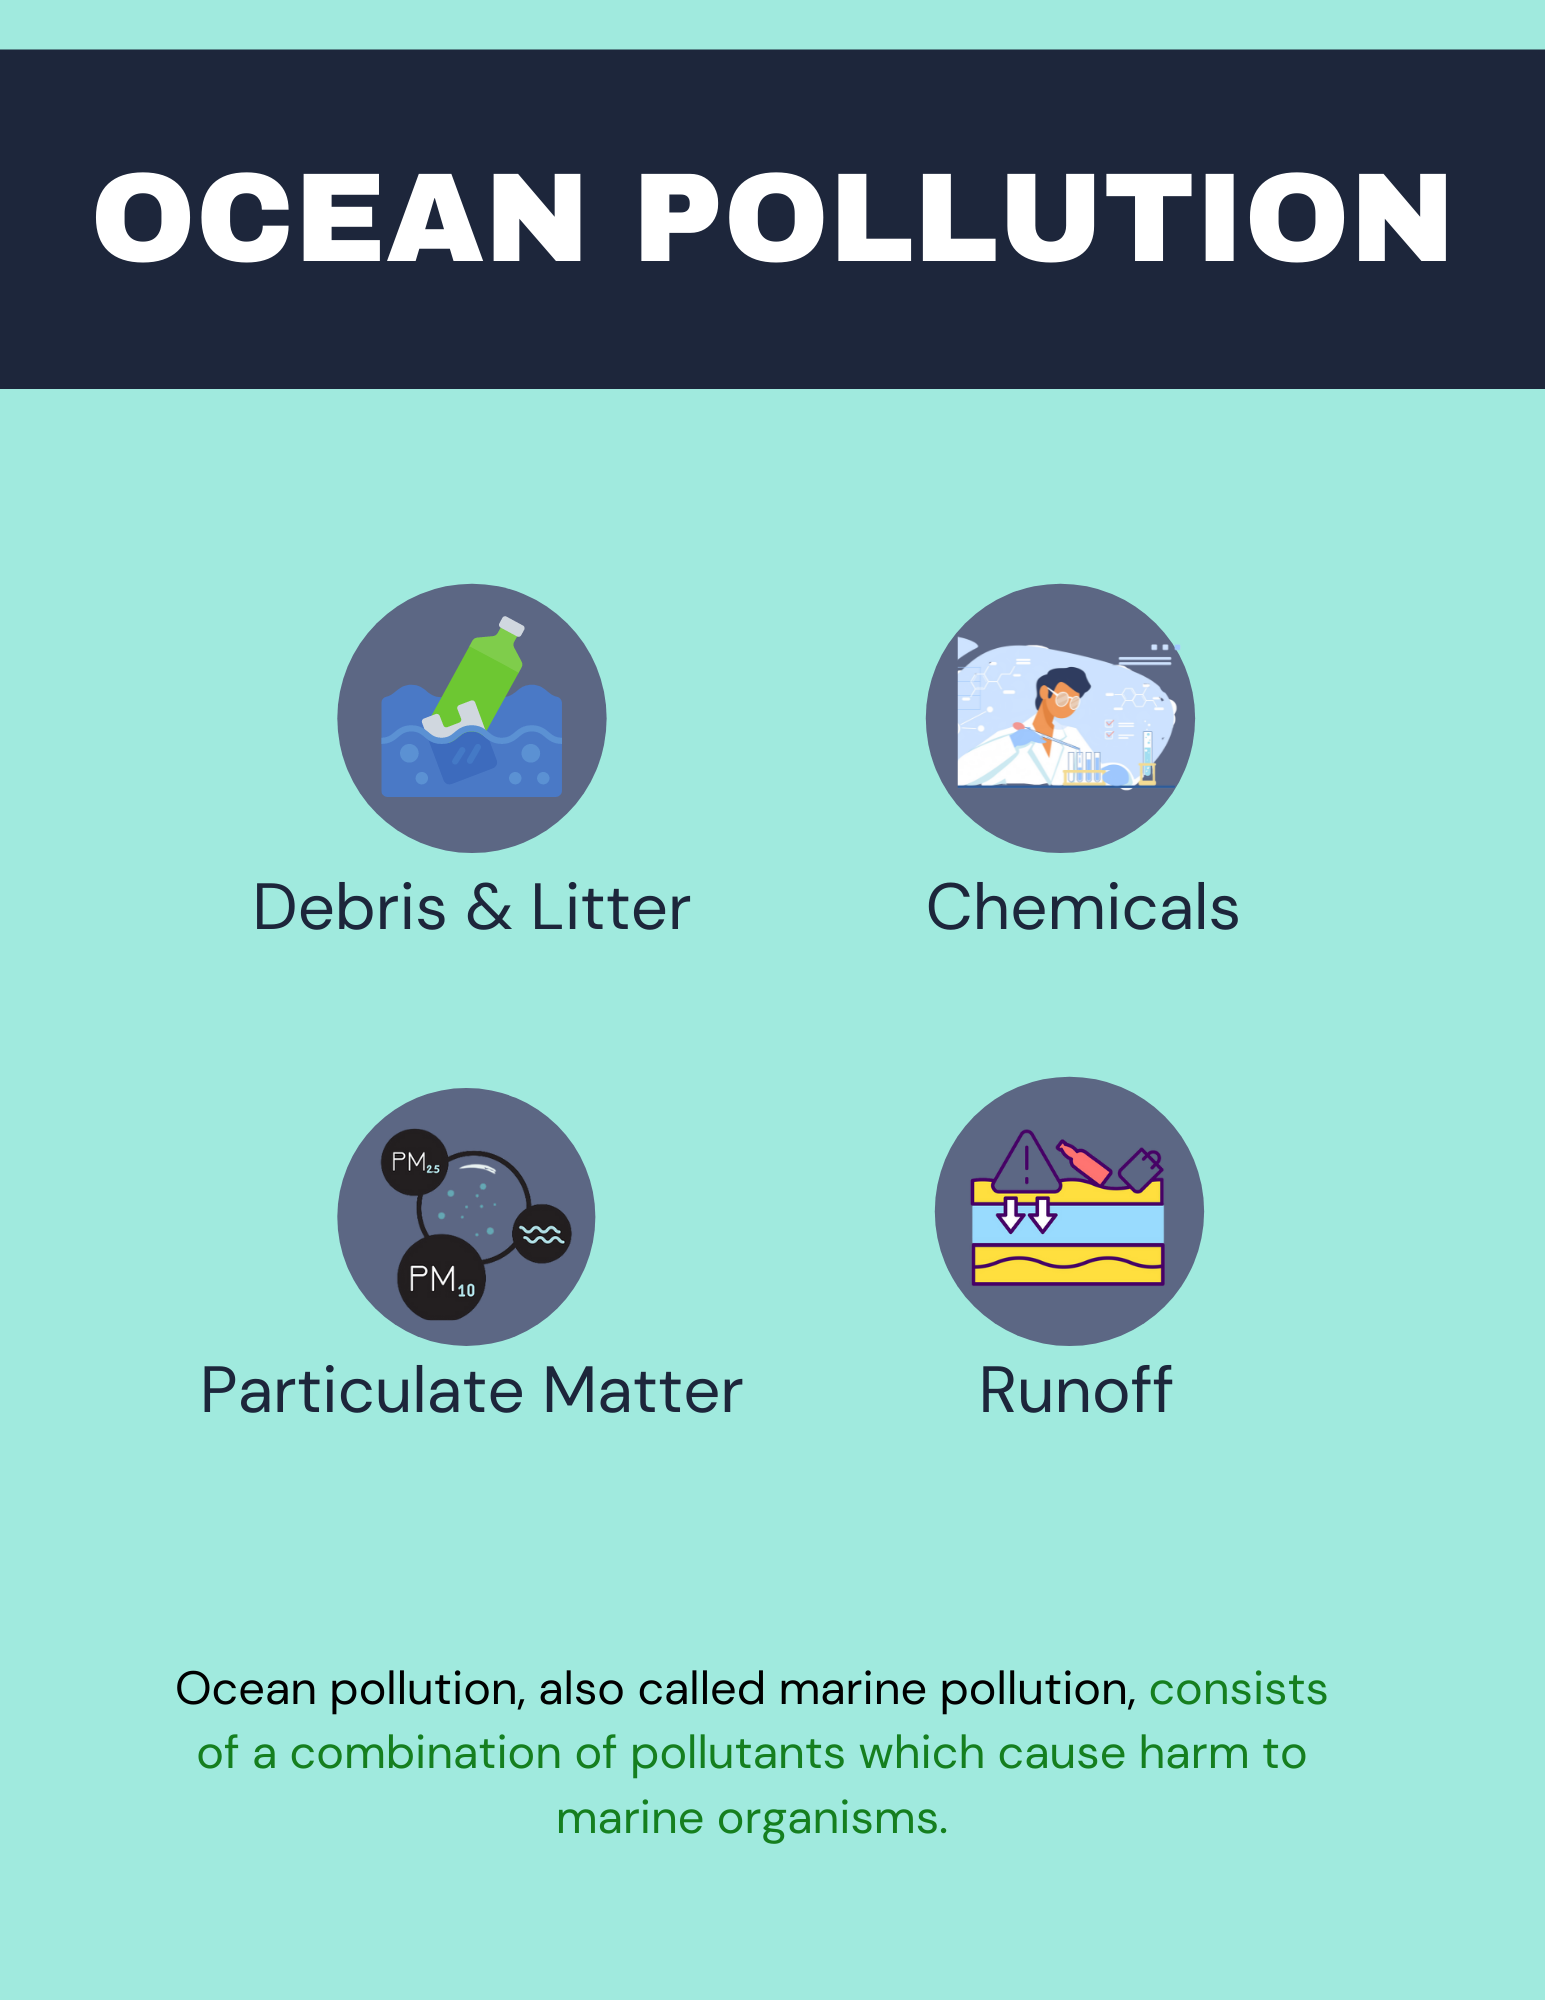 How Does Ocean Pollution Impact The Environment